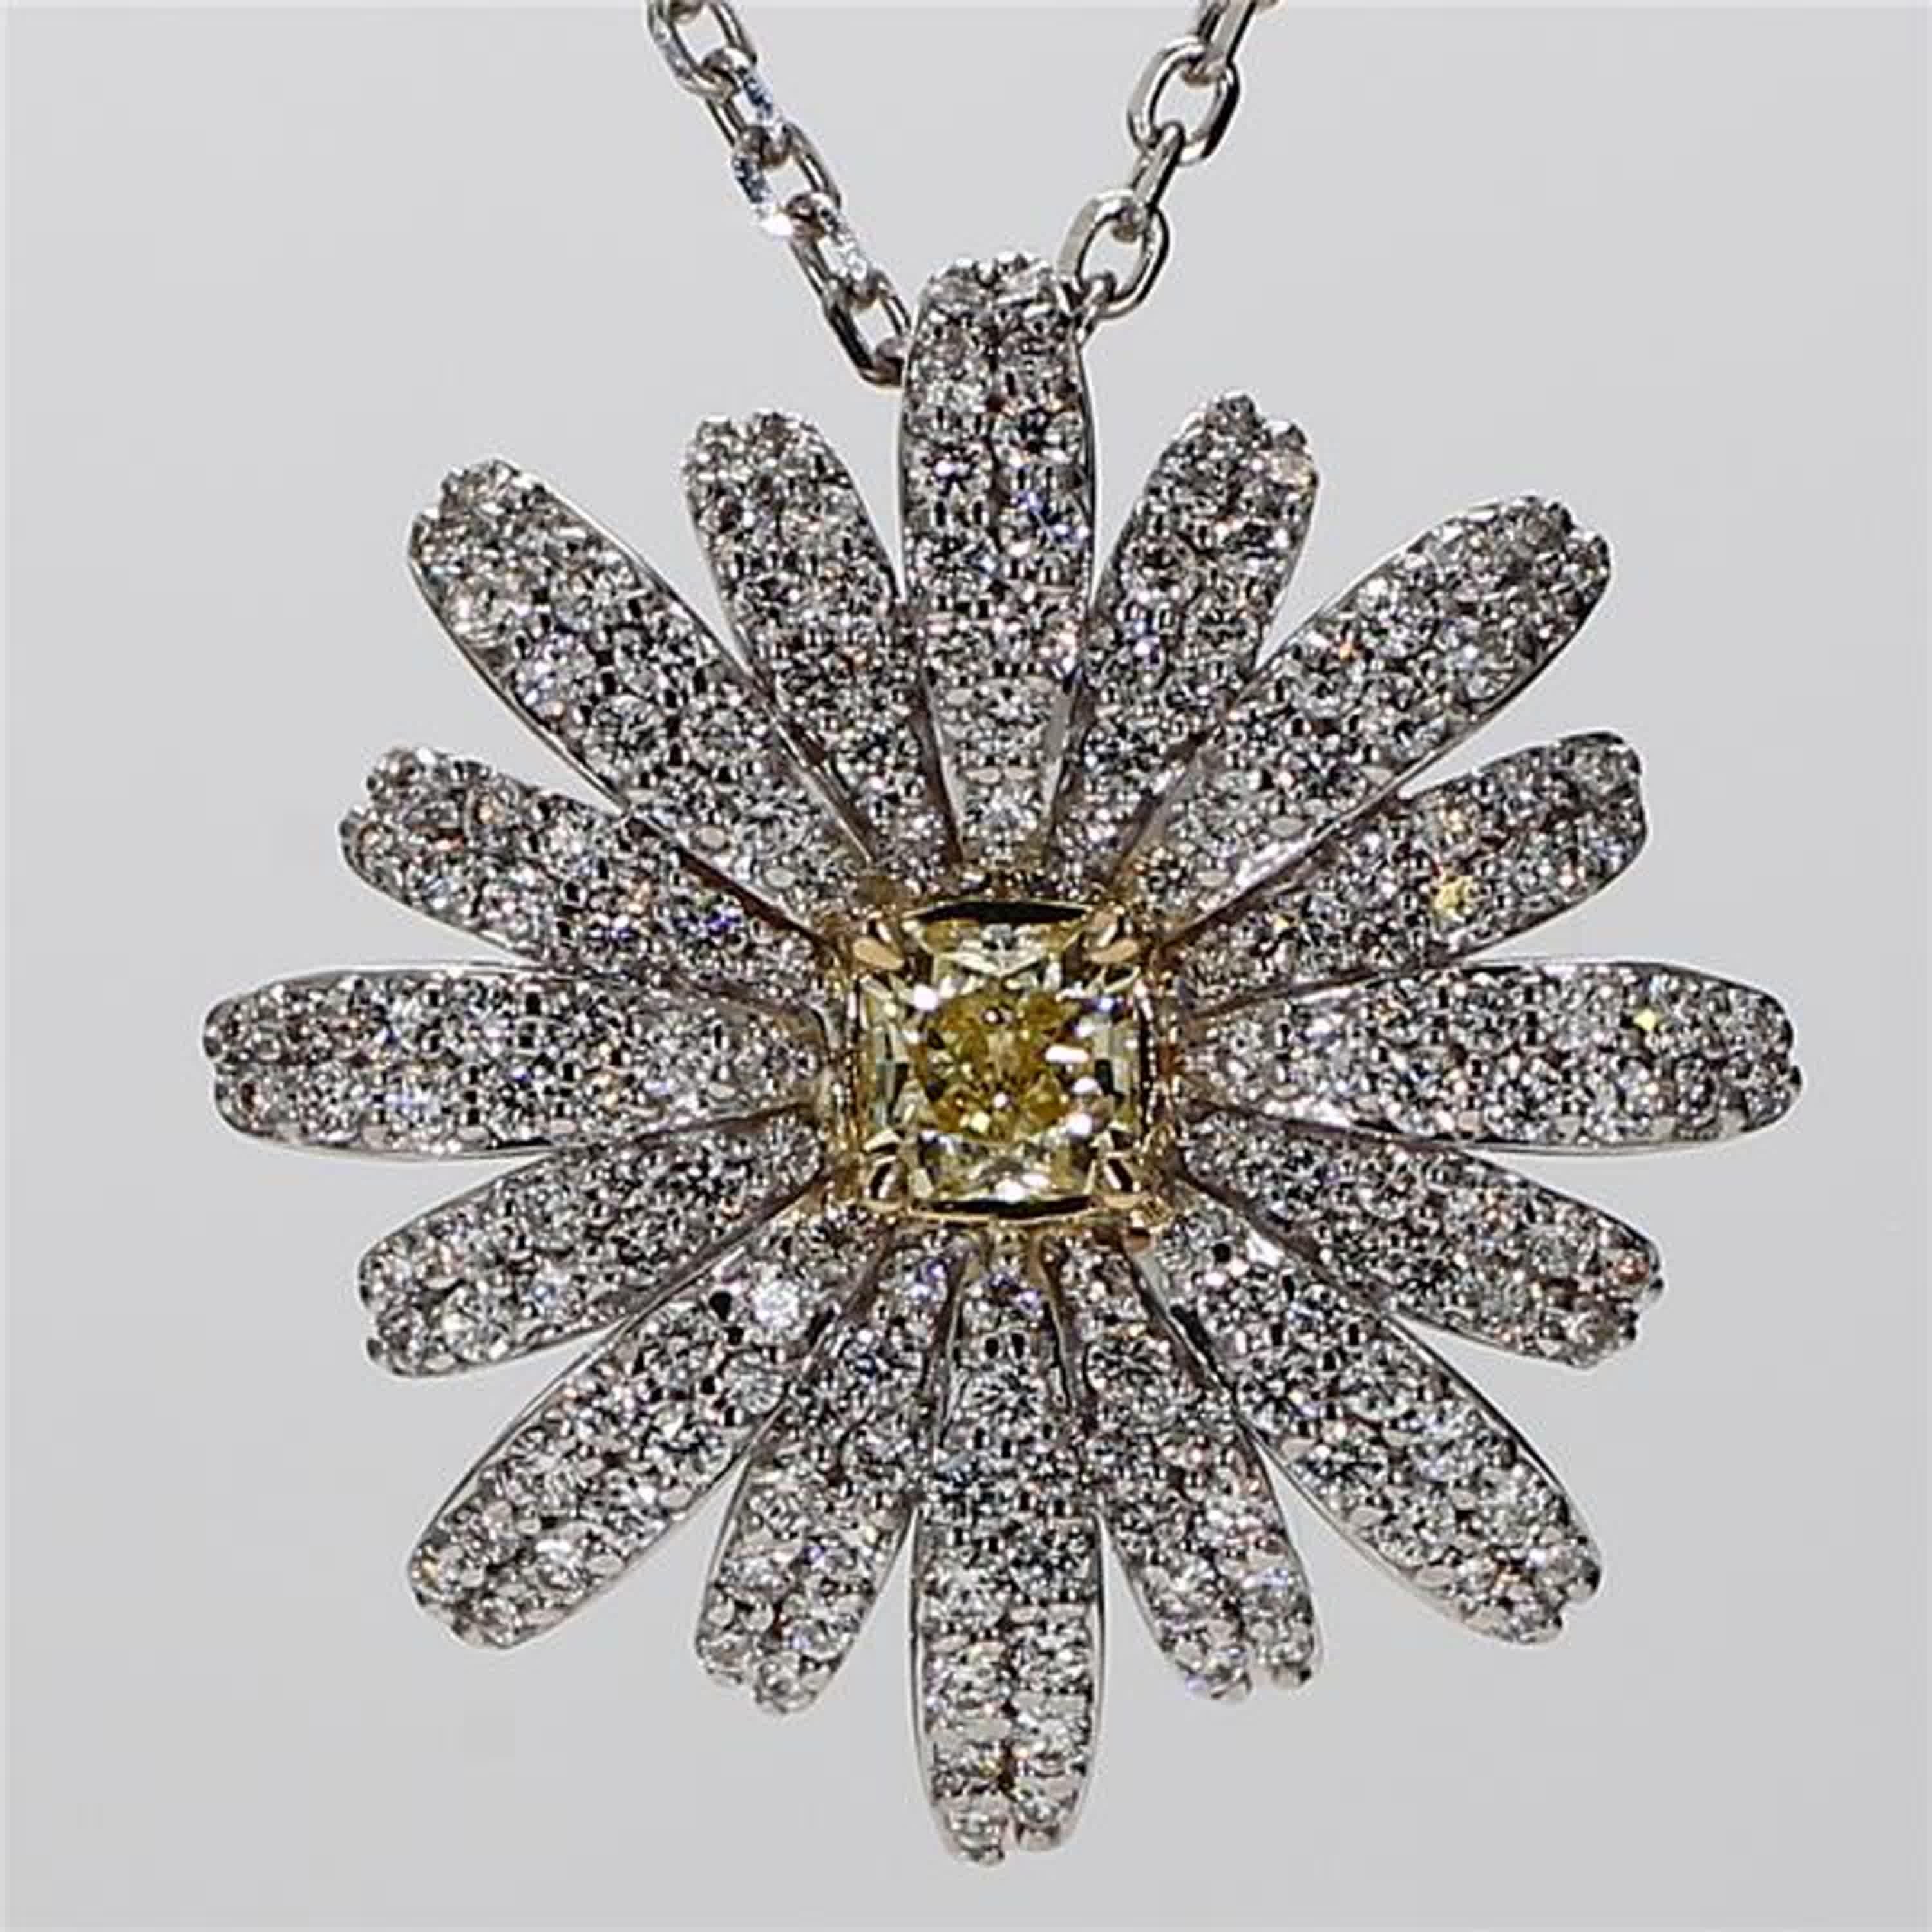 RareGemWorld's classic diamond necklace. Mounted in a beautiful 18K Yellow and White Gold setting with a natural radiant cut yellow diamond. The yellow diamond is surrounded by round natural white diamond melee in a beautiful flower shape. This